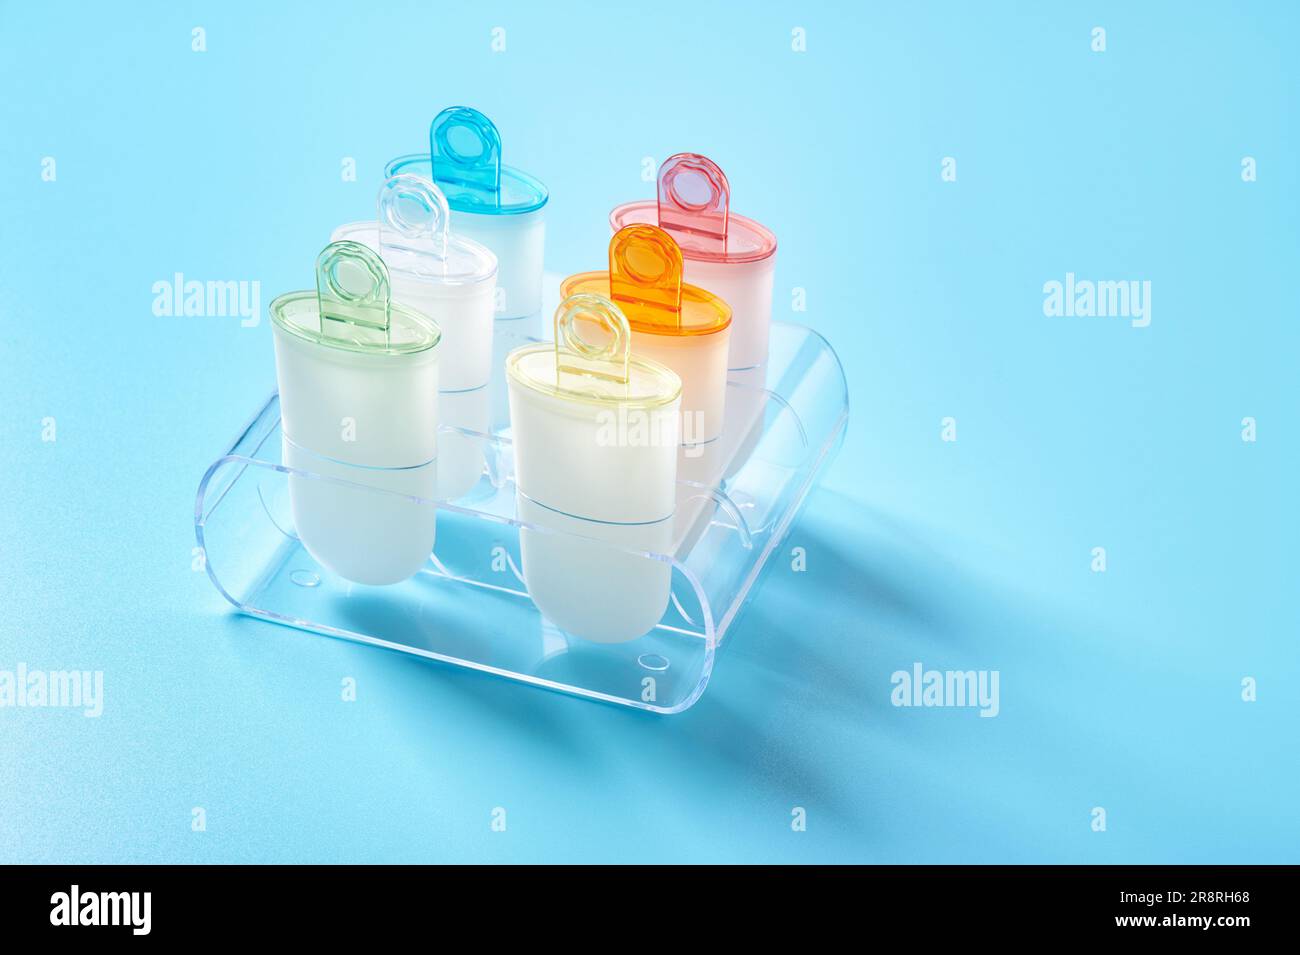 Plastic ice cream lolly form molds stand on plexiglas stand Stock Photo